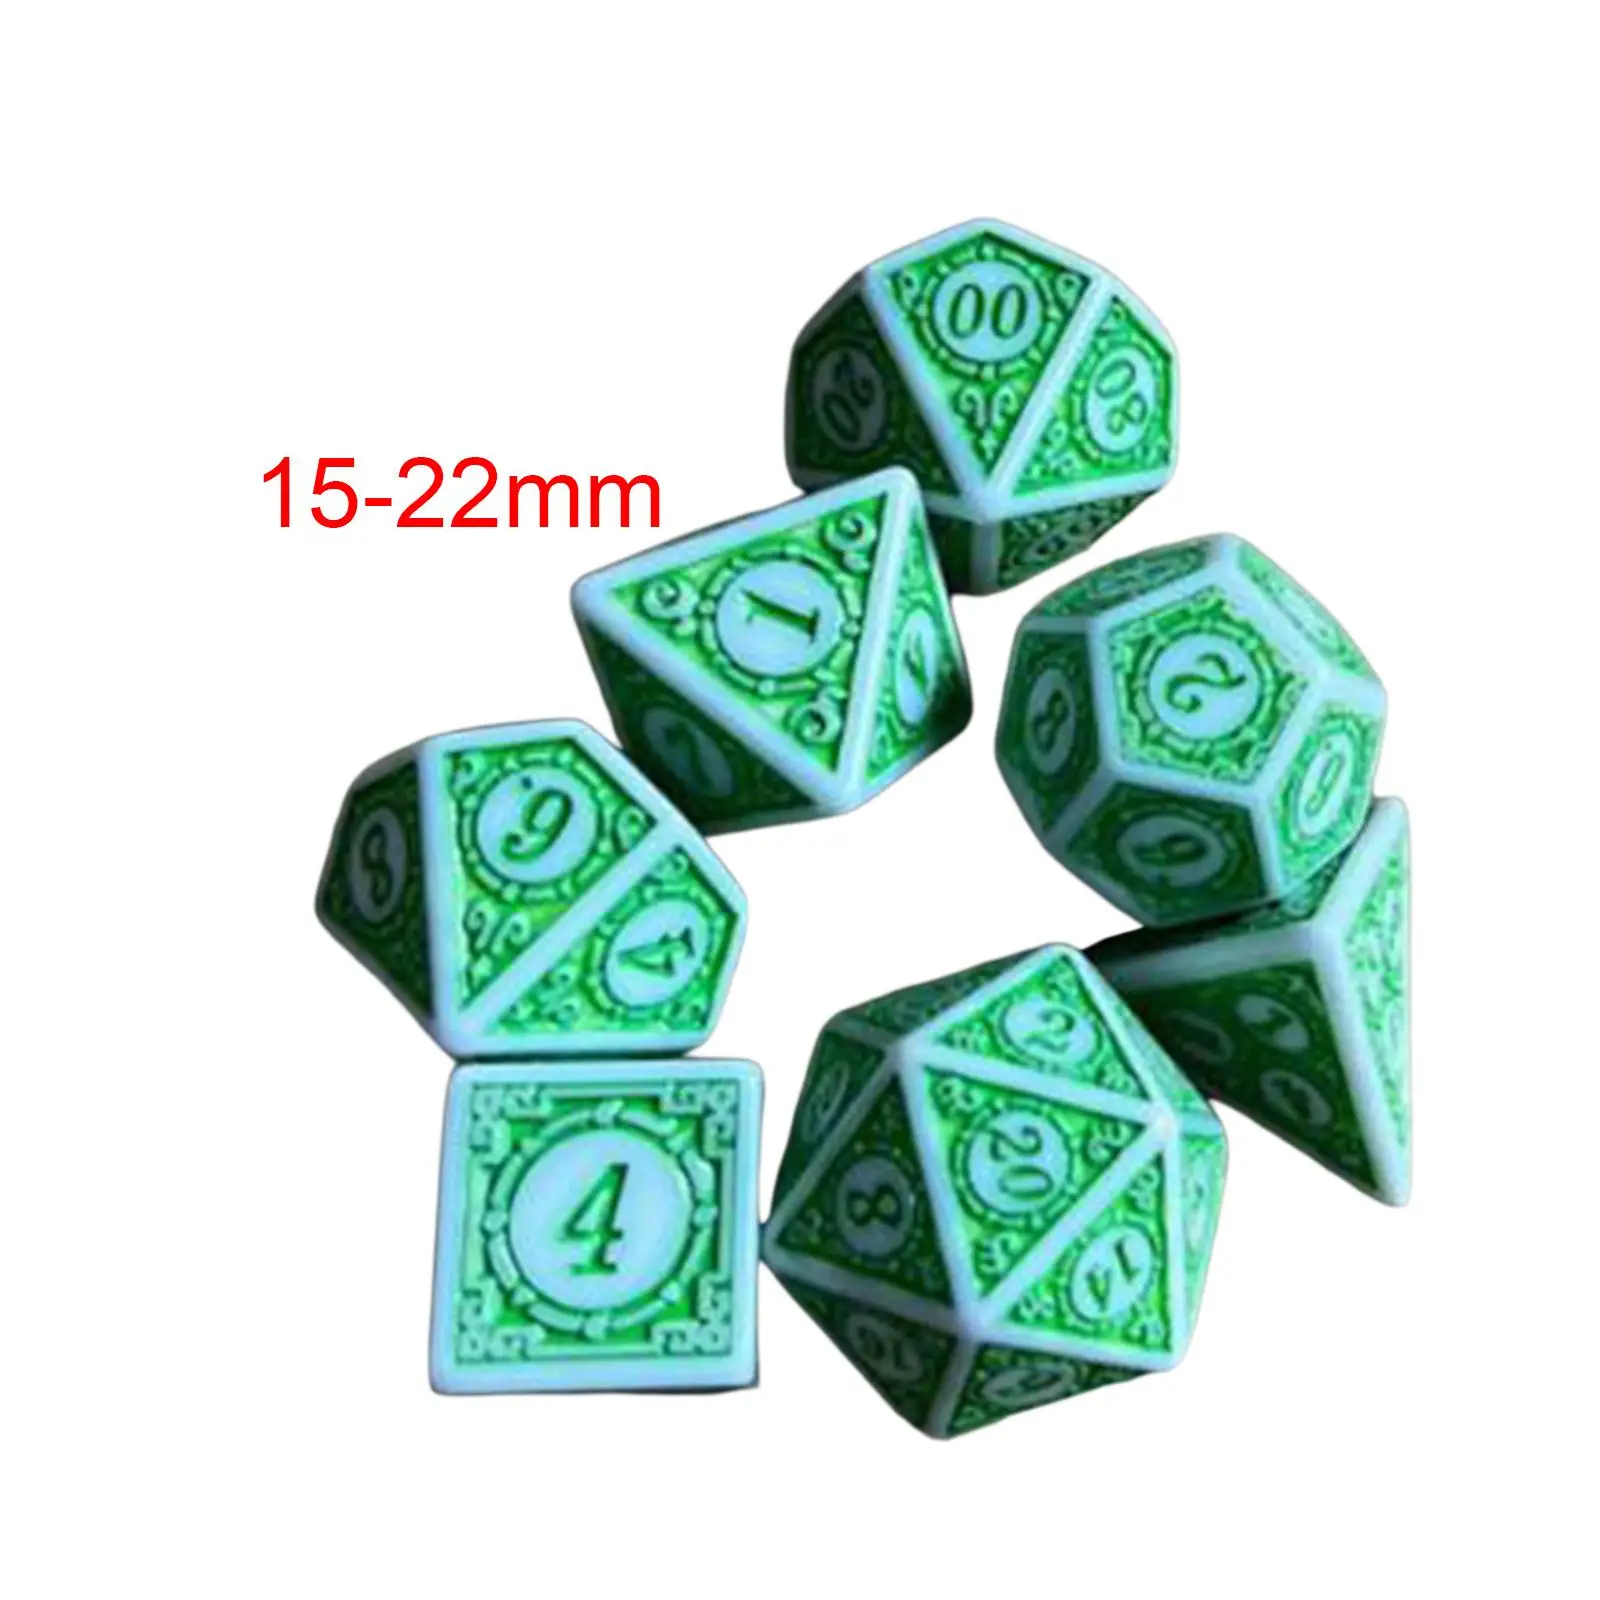 7Pcs Acrylic Polyhedral Dices Set D4-D20 Multicolour Dices Math Teaching Assortment for Role Playing Table Games Card Games